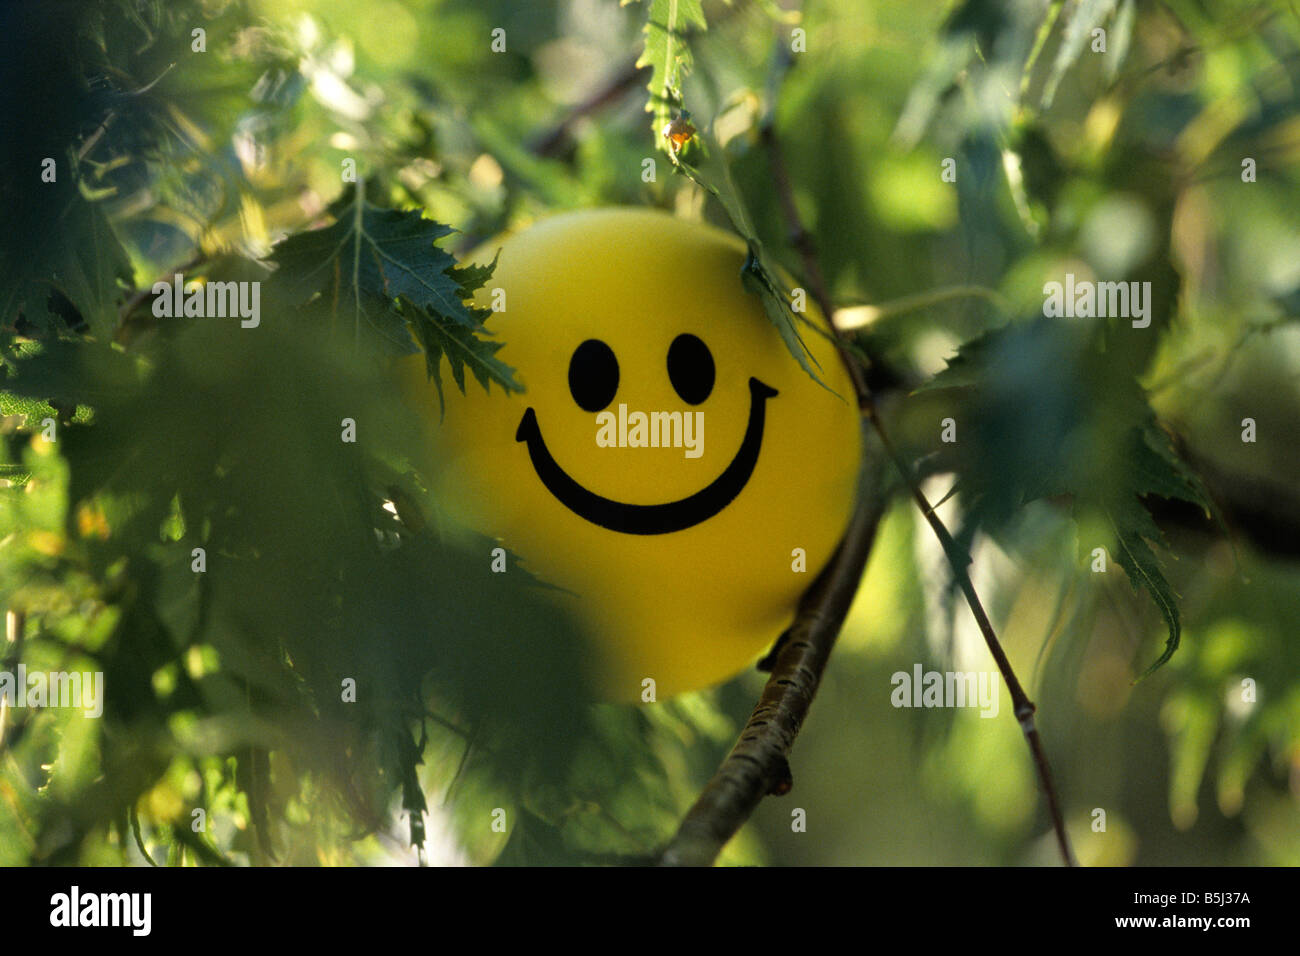 A smiley rubber ball in the green leaves. Stock Photo